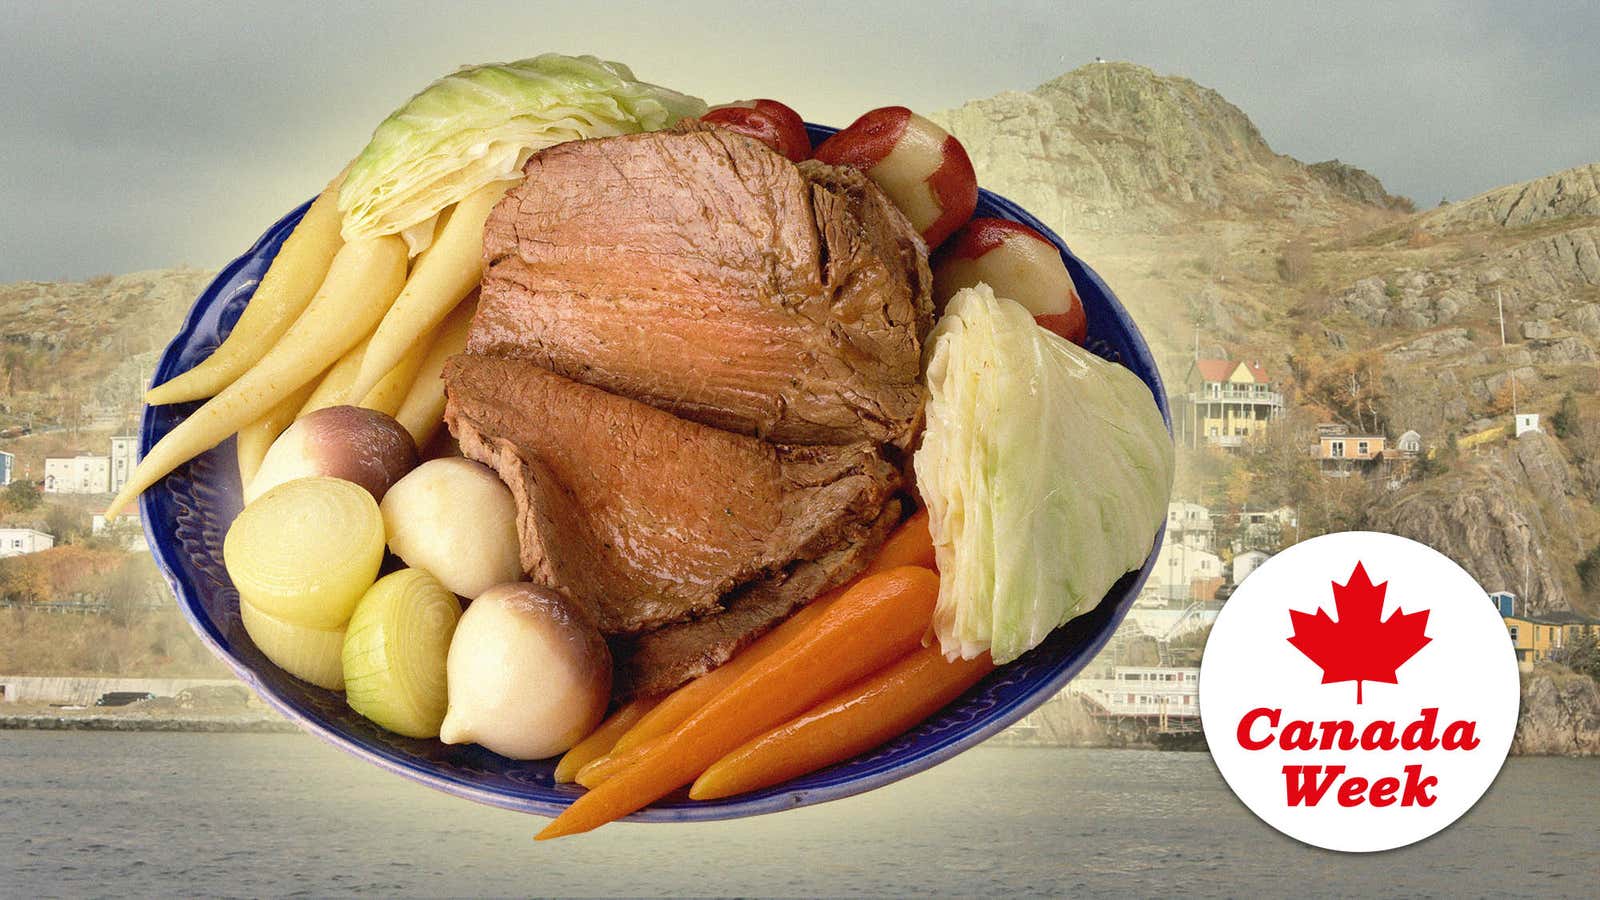 Jigg’s Dinner is a classic Irish boiled dinner with a Newfoundland twist